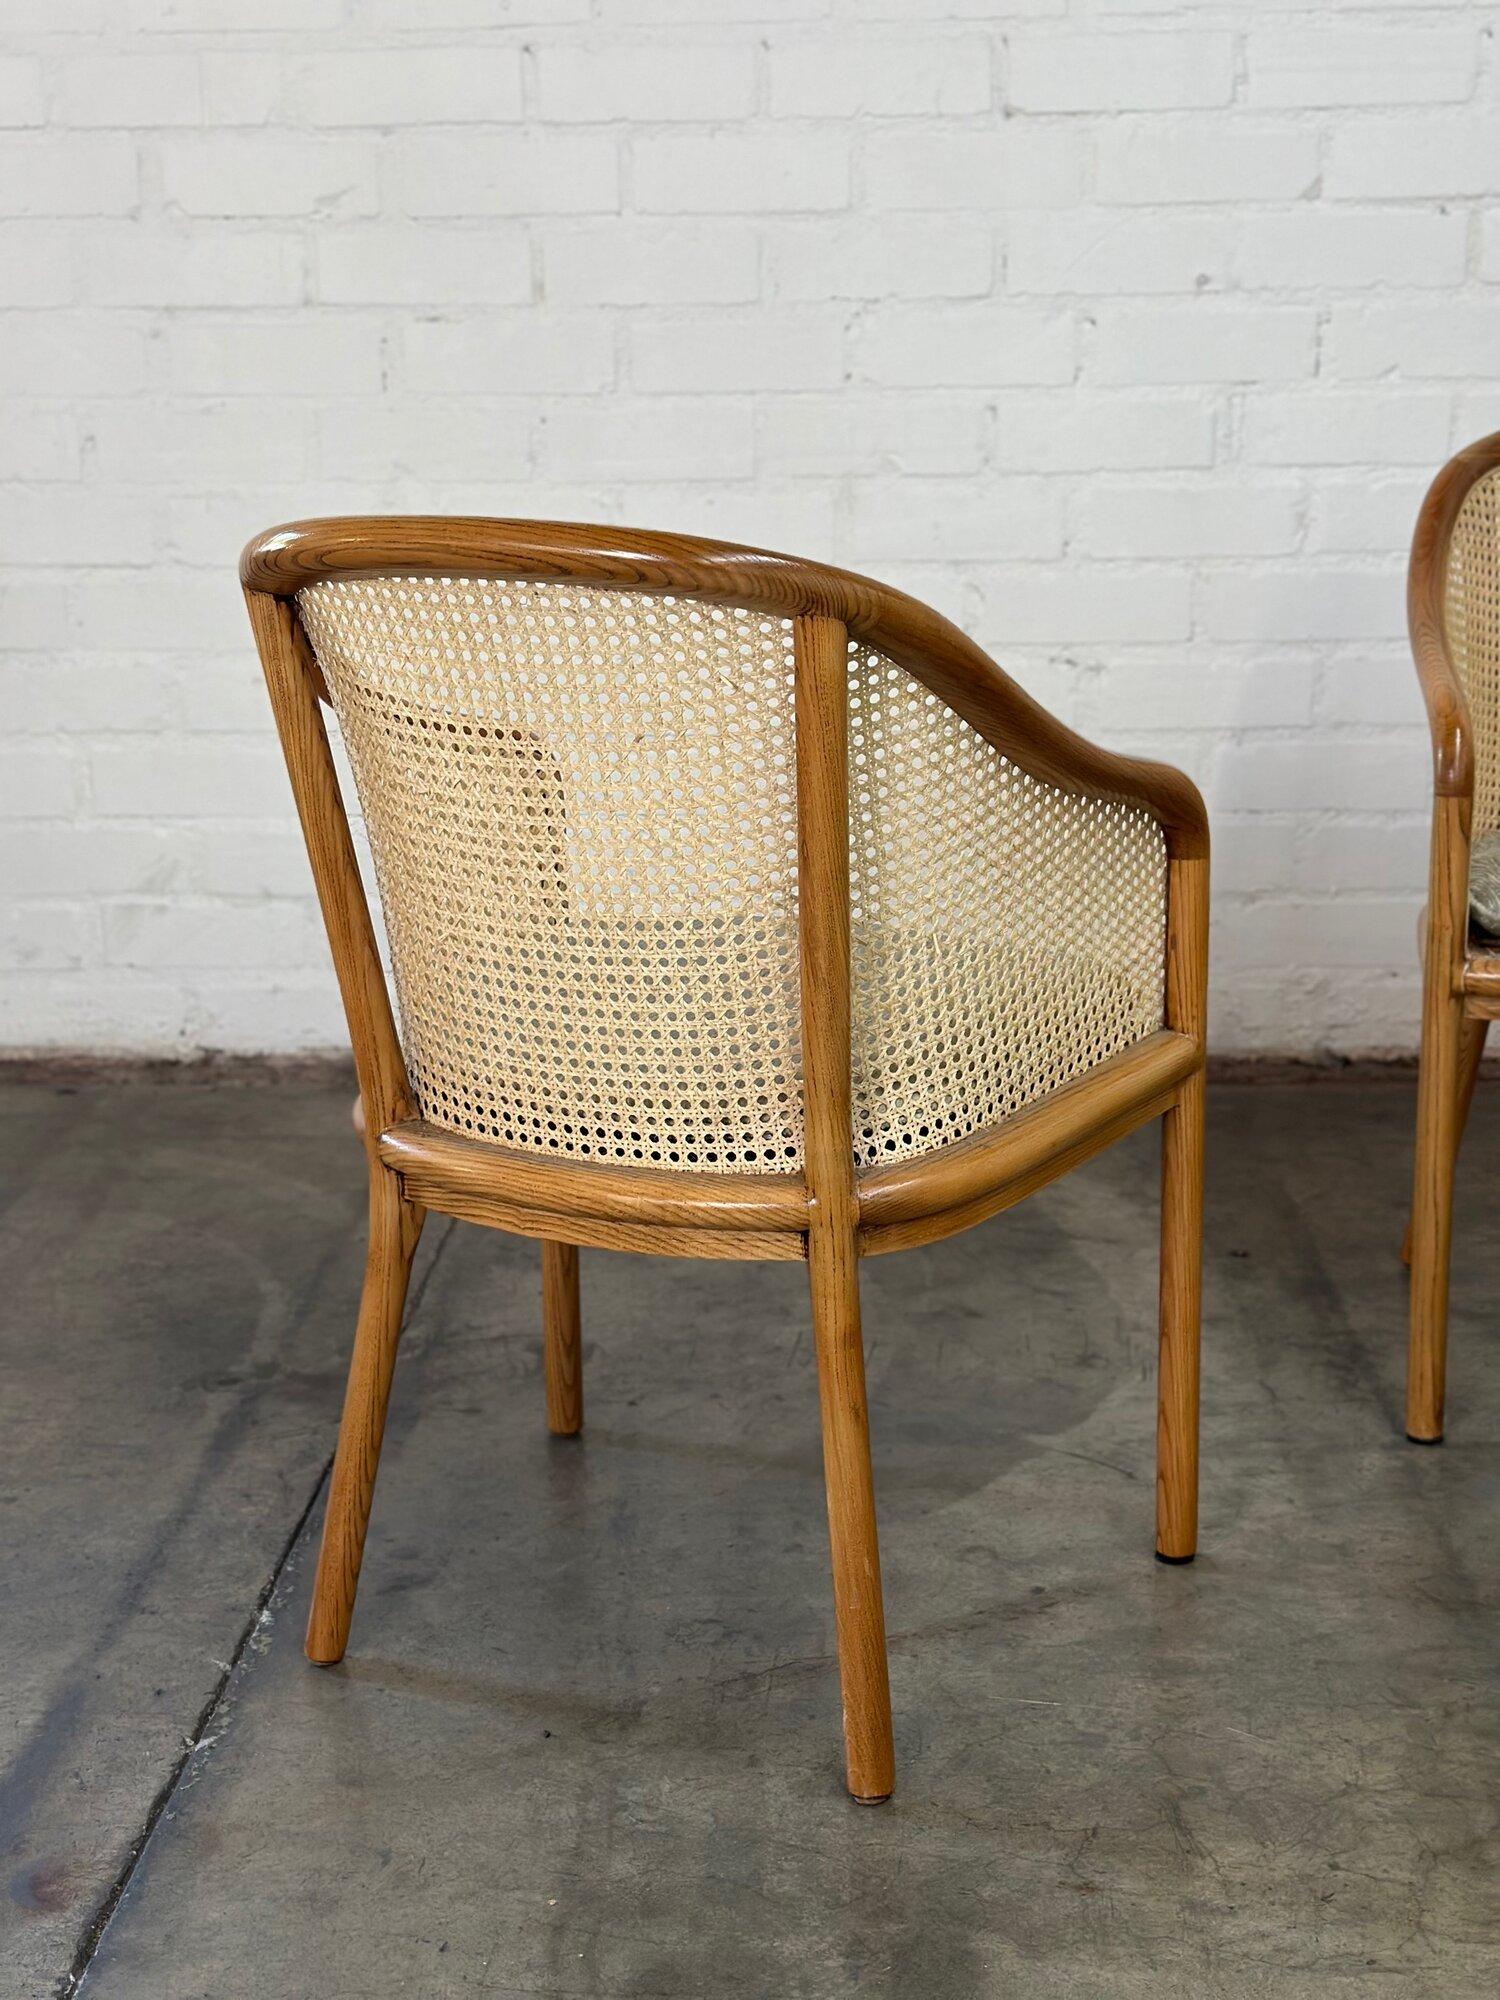 Mid-20th Century Cane side chairs by Ward Bennet -pair